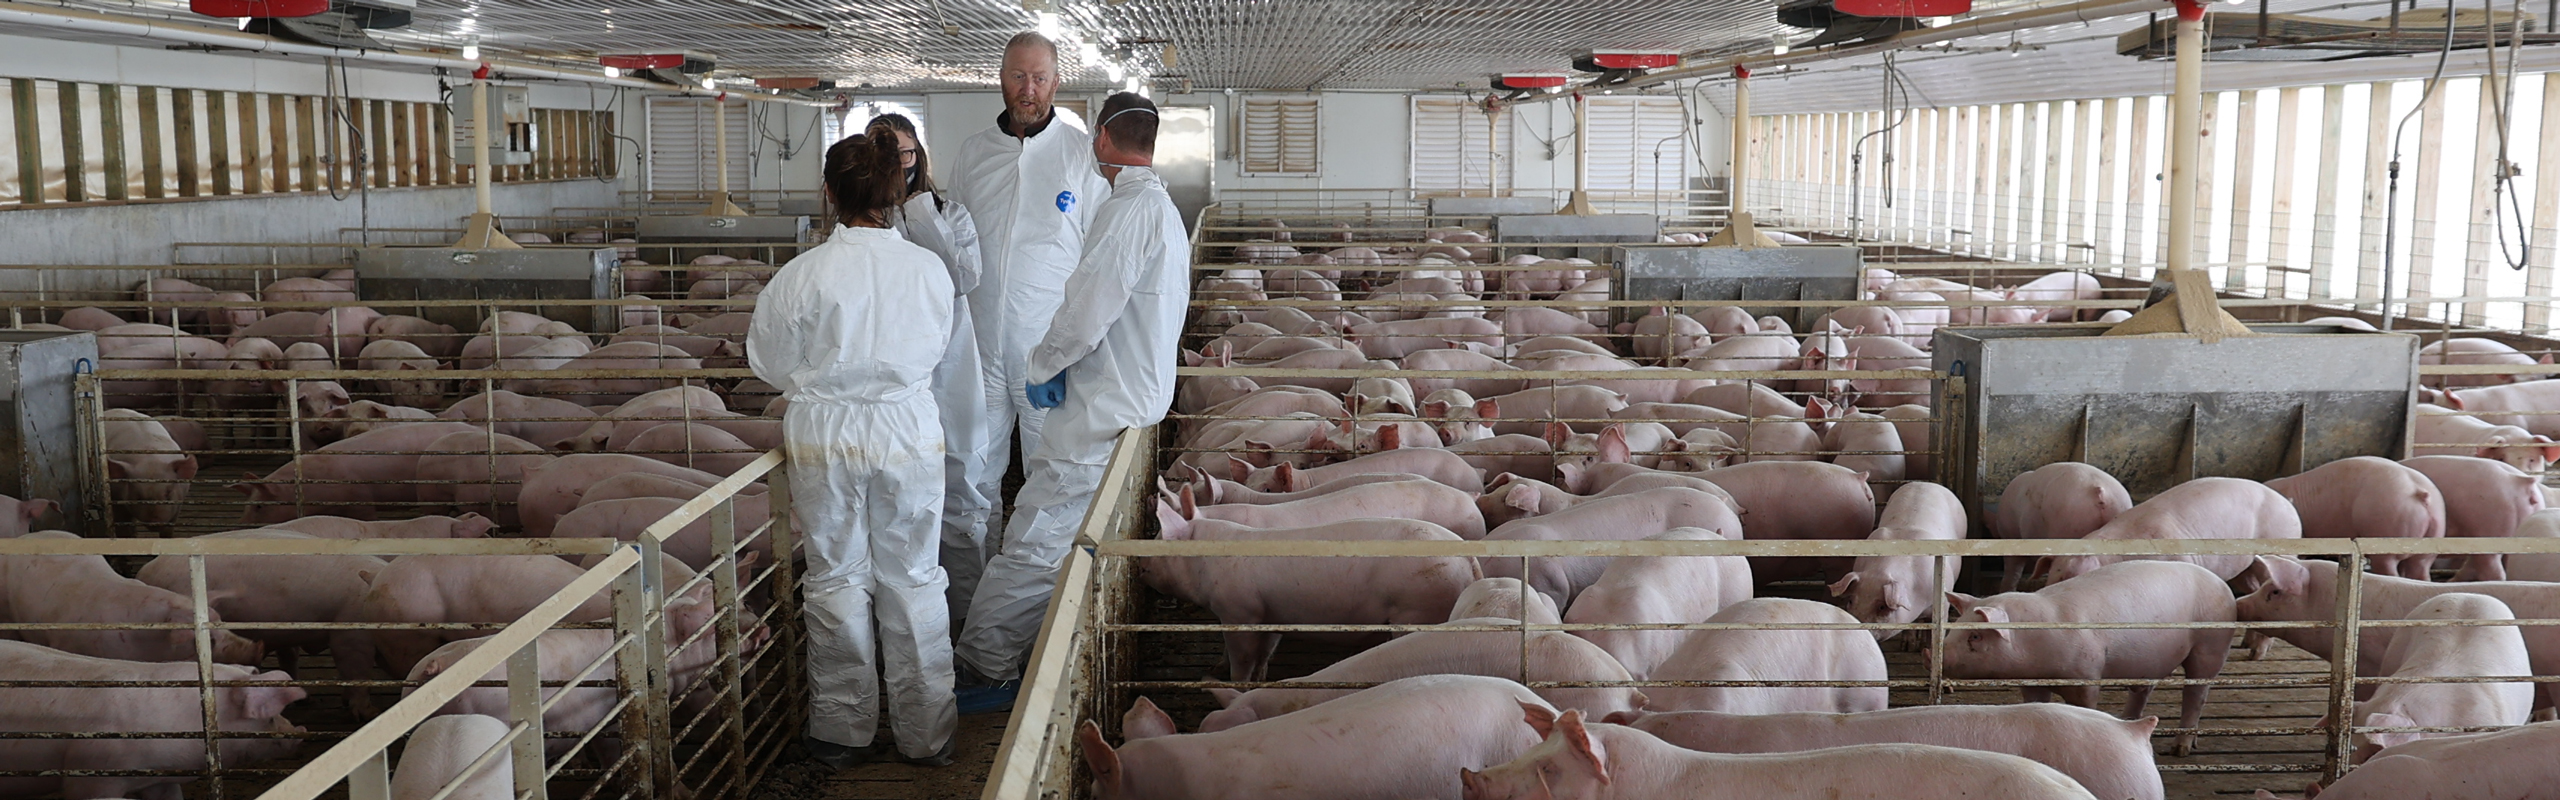 Swine in stalls with workers conferring around the swine. 